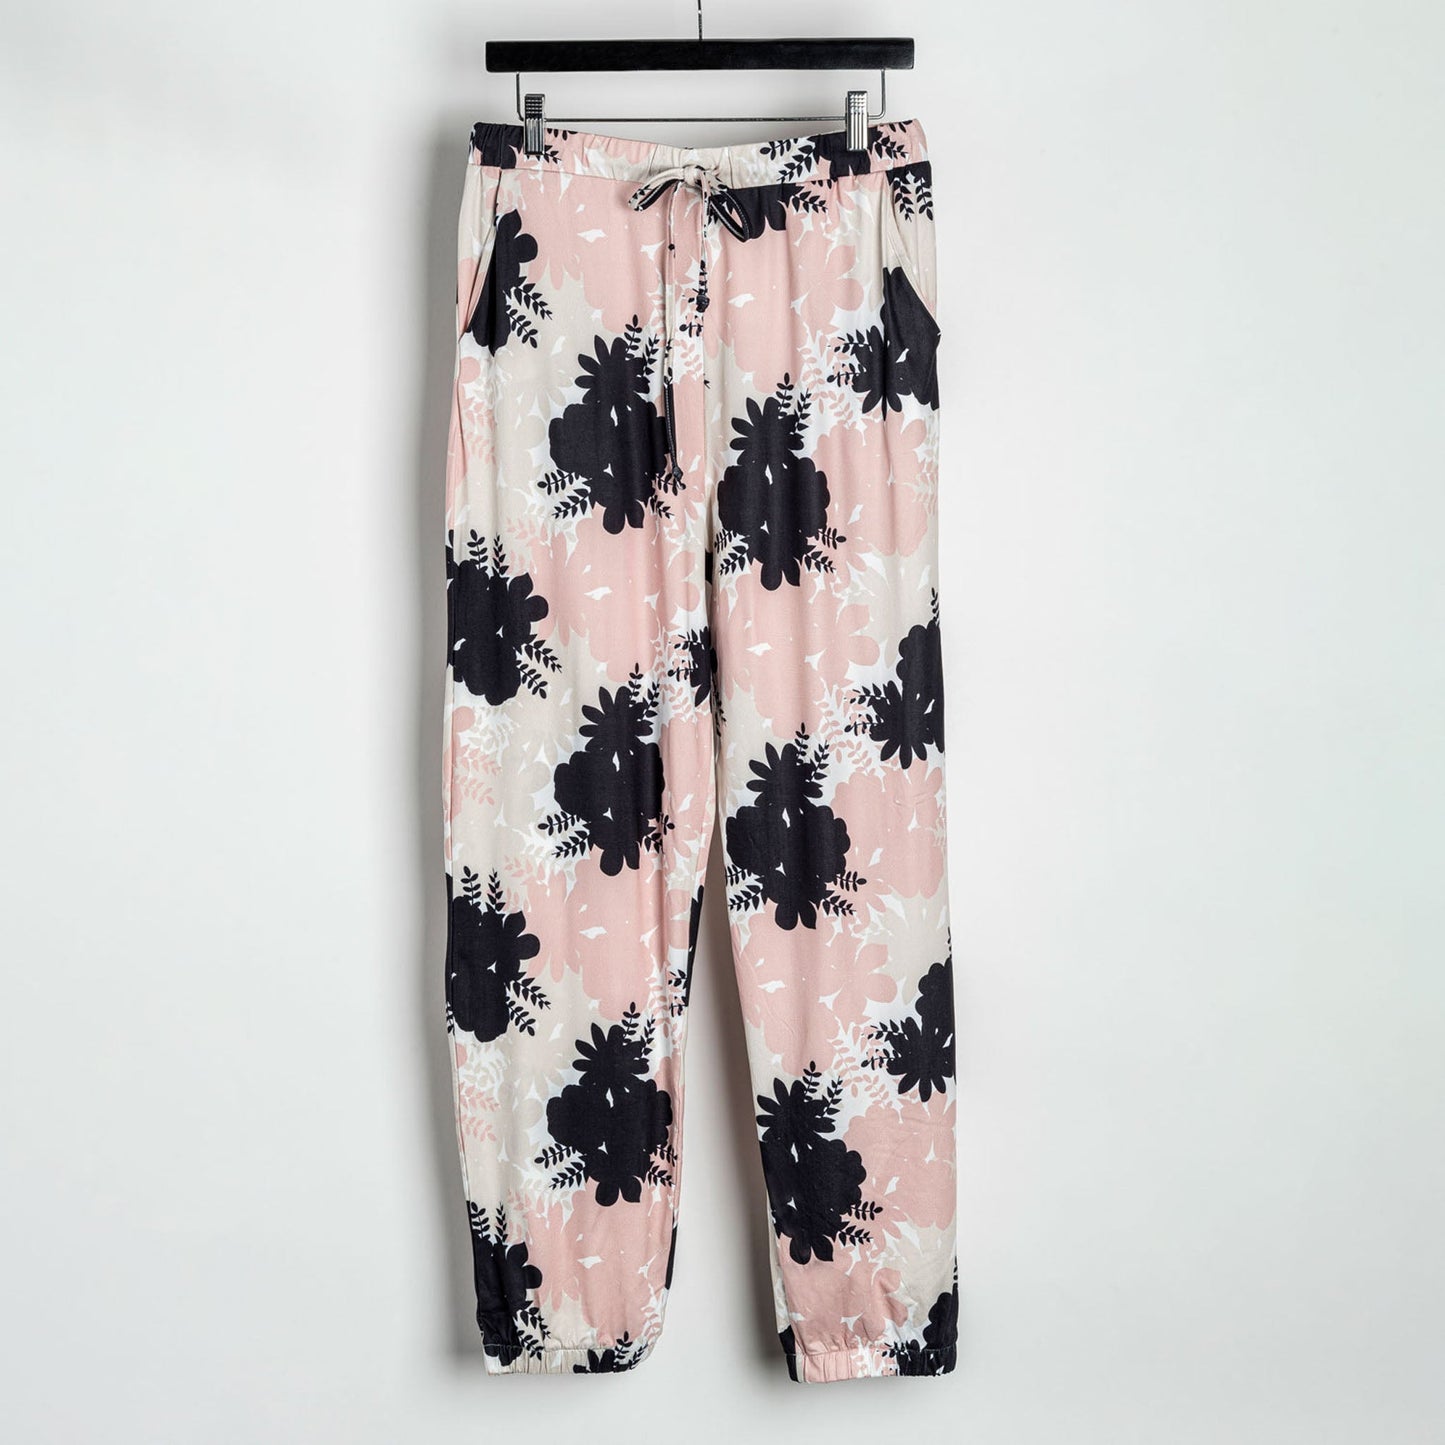 Blush Floral Two-Piece Hooded Loungewear Set